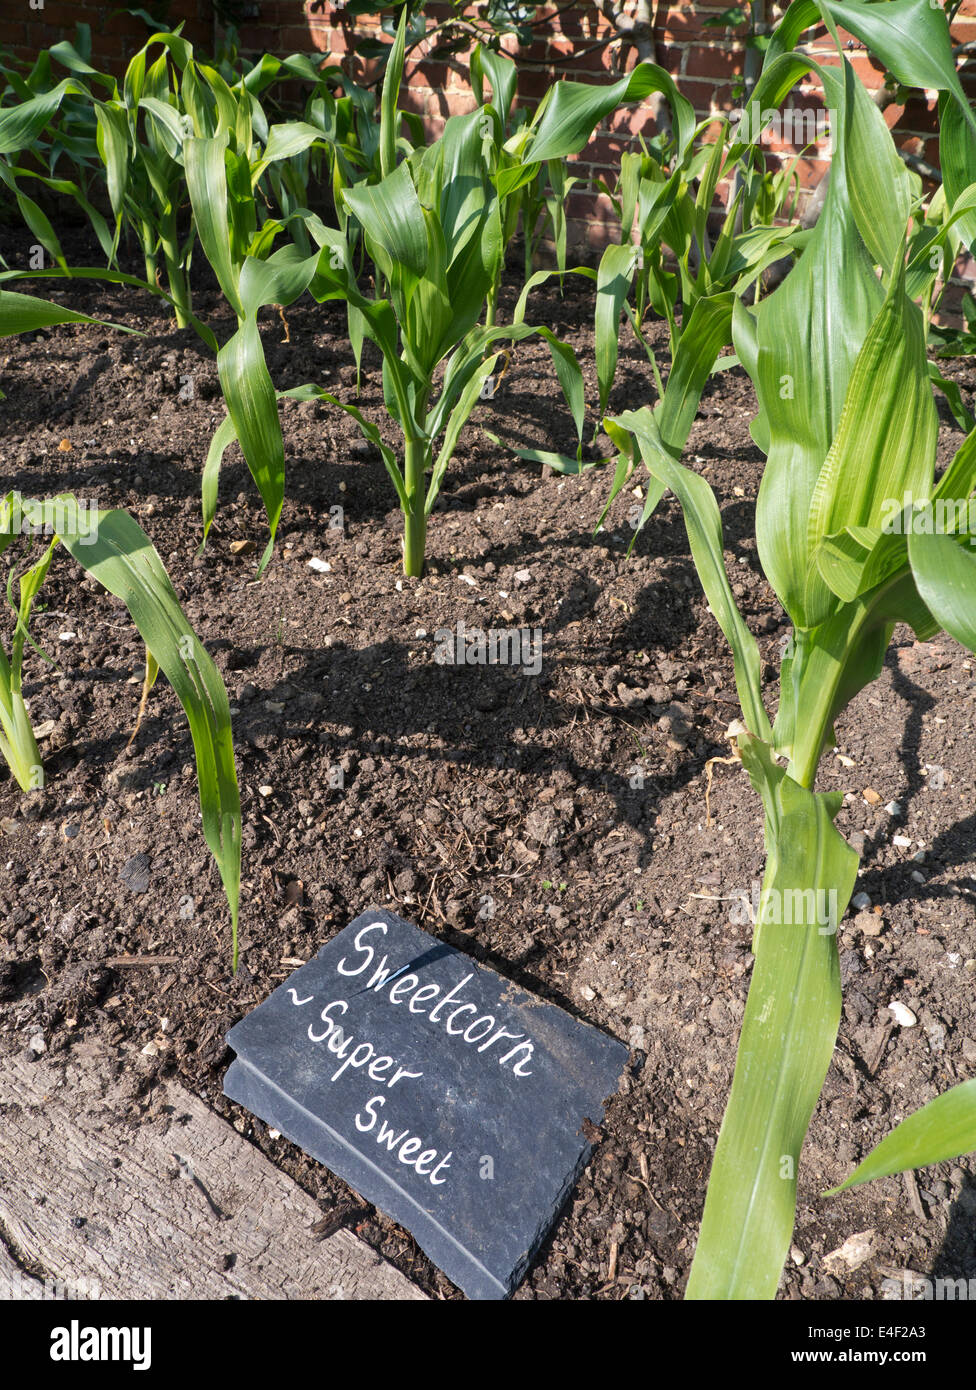 Super Sweet Sweetcorn growing in a restaurant kitchen garden with slate name label Stock Photo